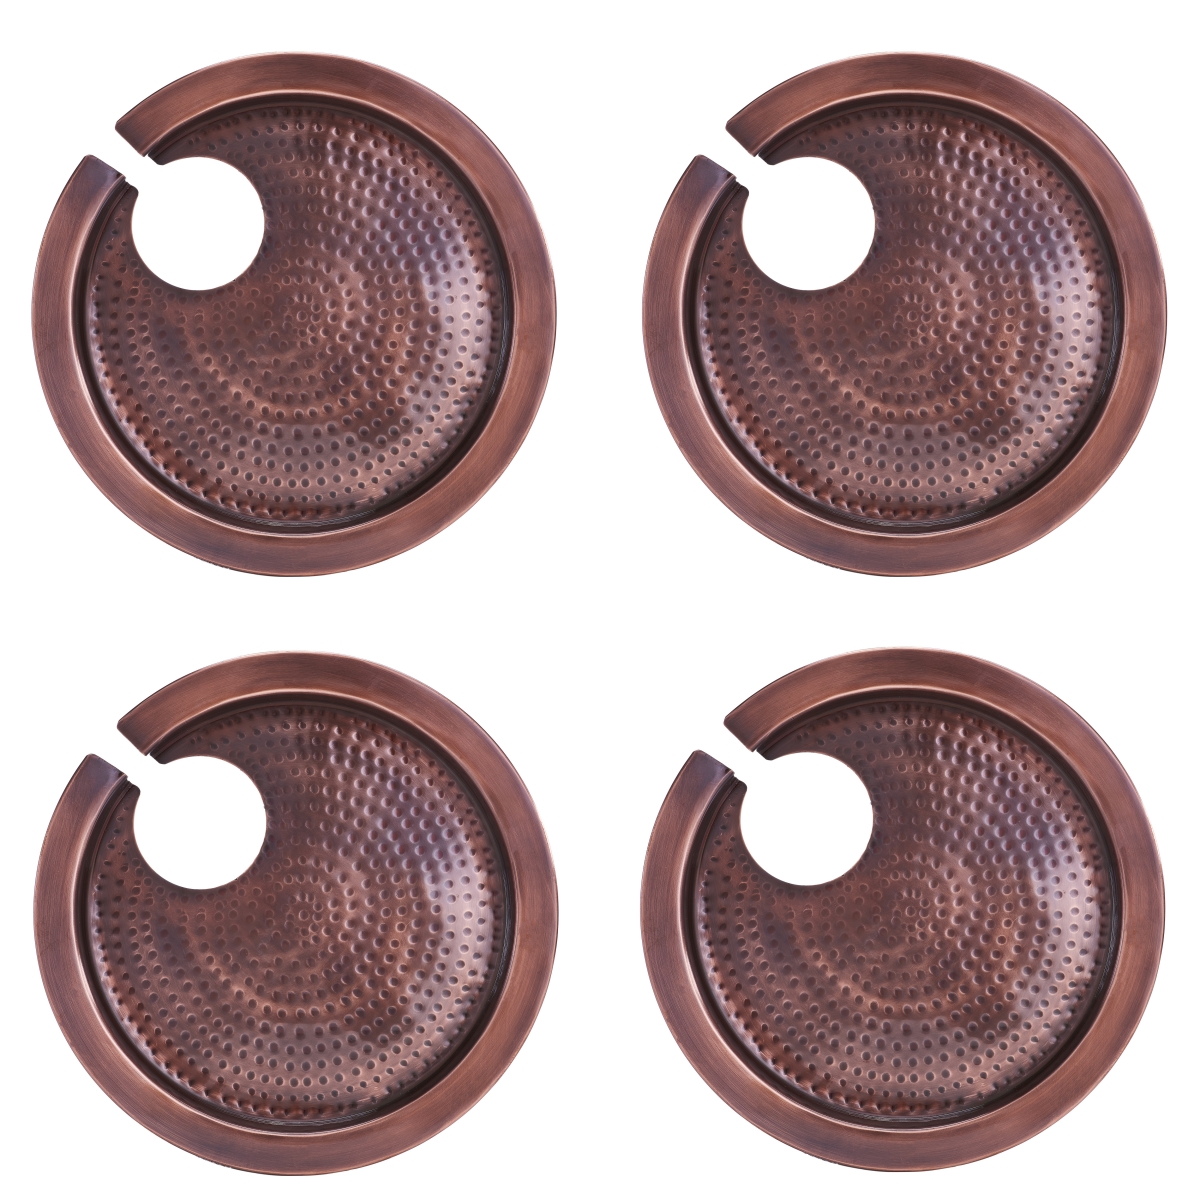 5470hac 9.75 In. Hammered Buffet Plates With Wine Glass Holder, Antique Copper - Set Of 4